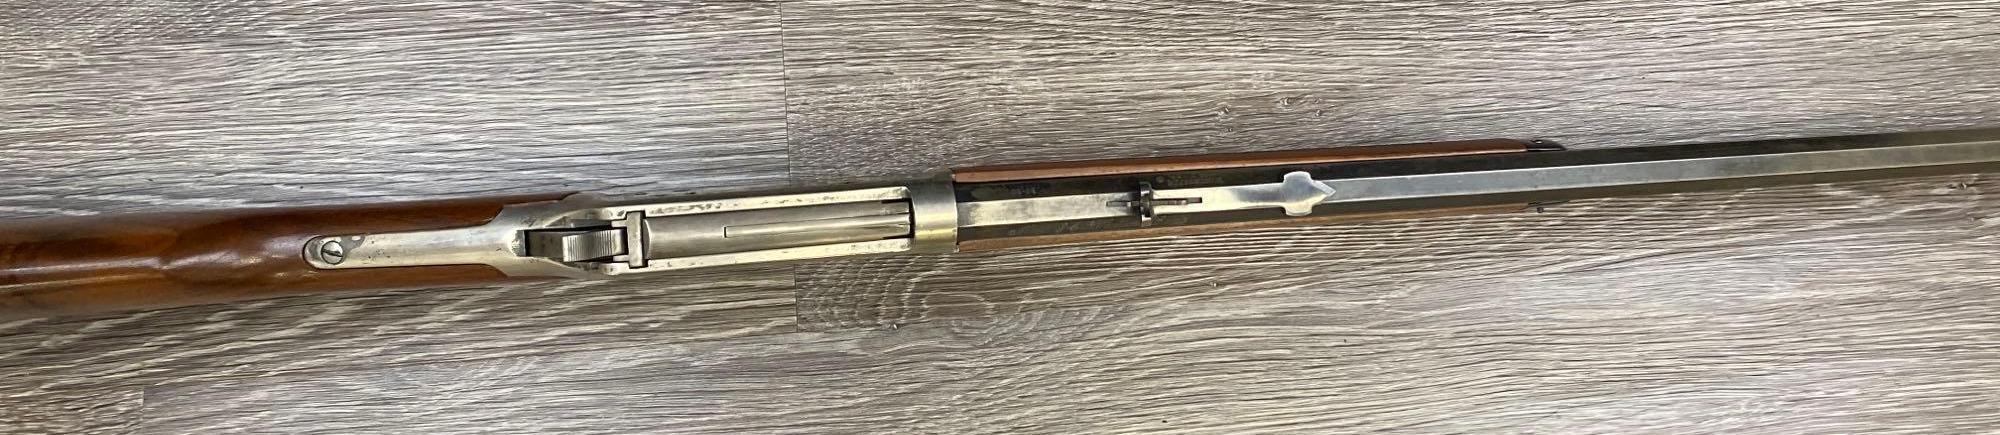 WINCHESTER MODEL 94 "WINCHESTER CLASSIC" 30-30 CALIBER LEVER ACTION RIFLE